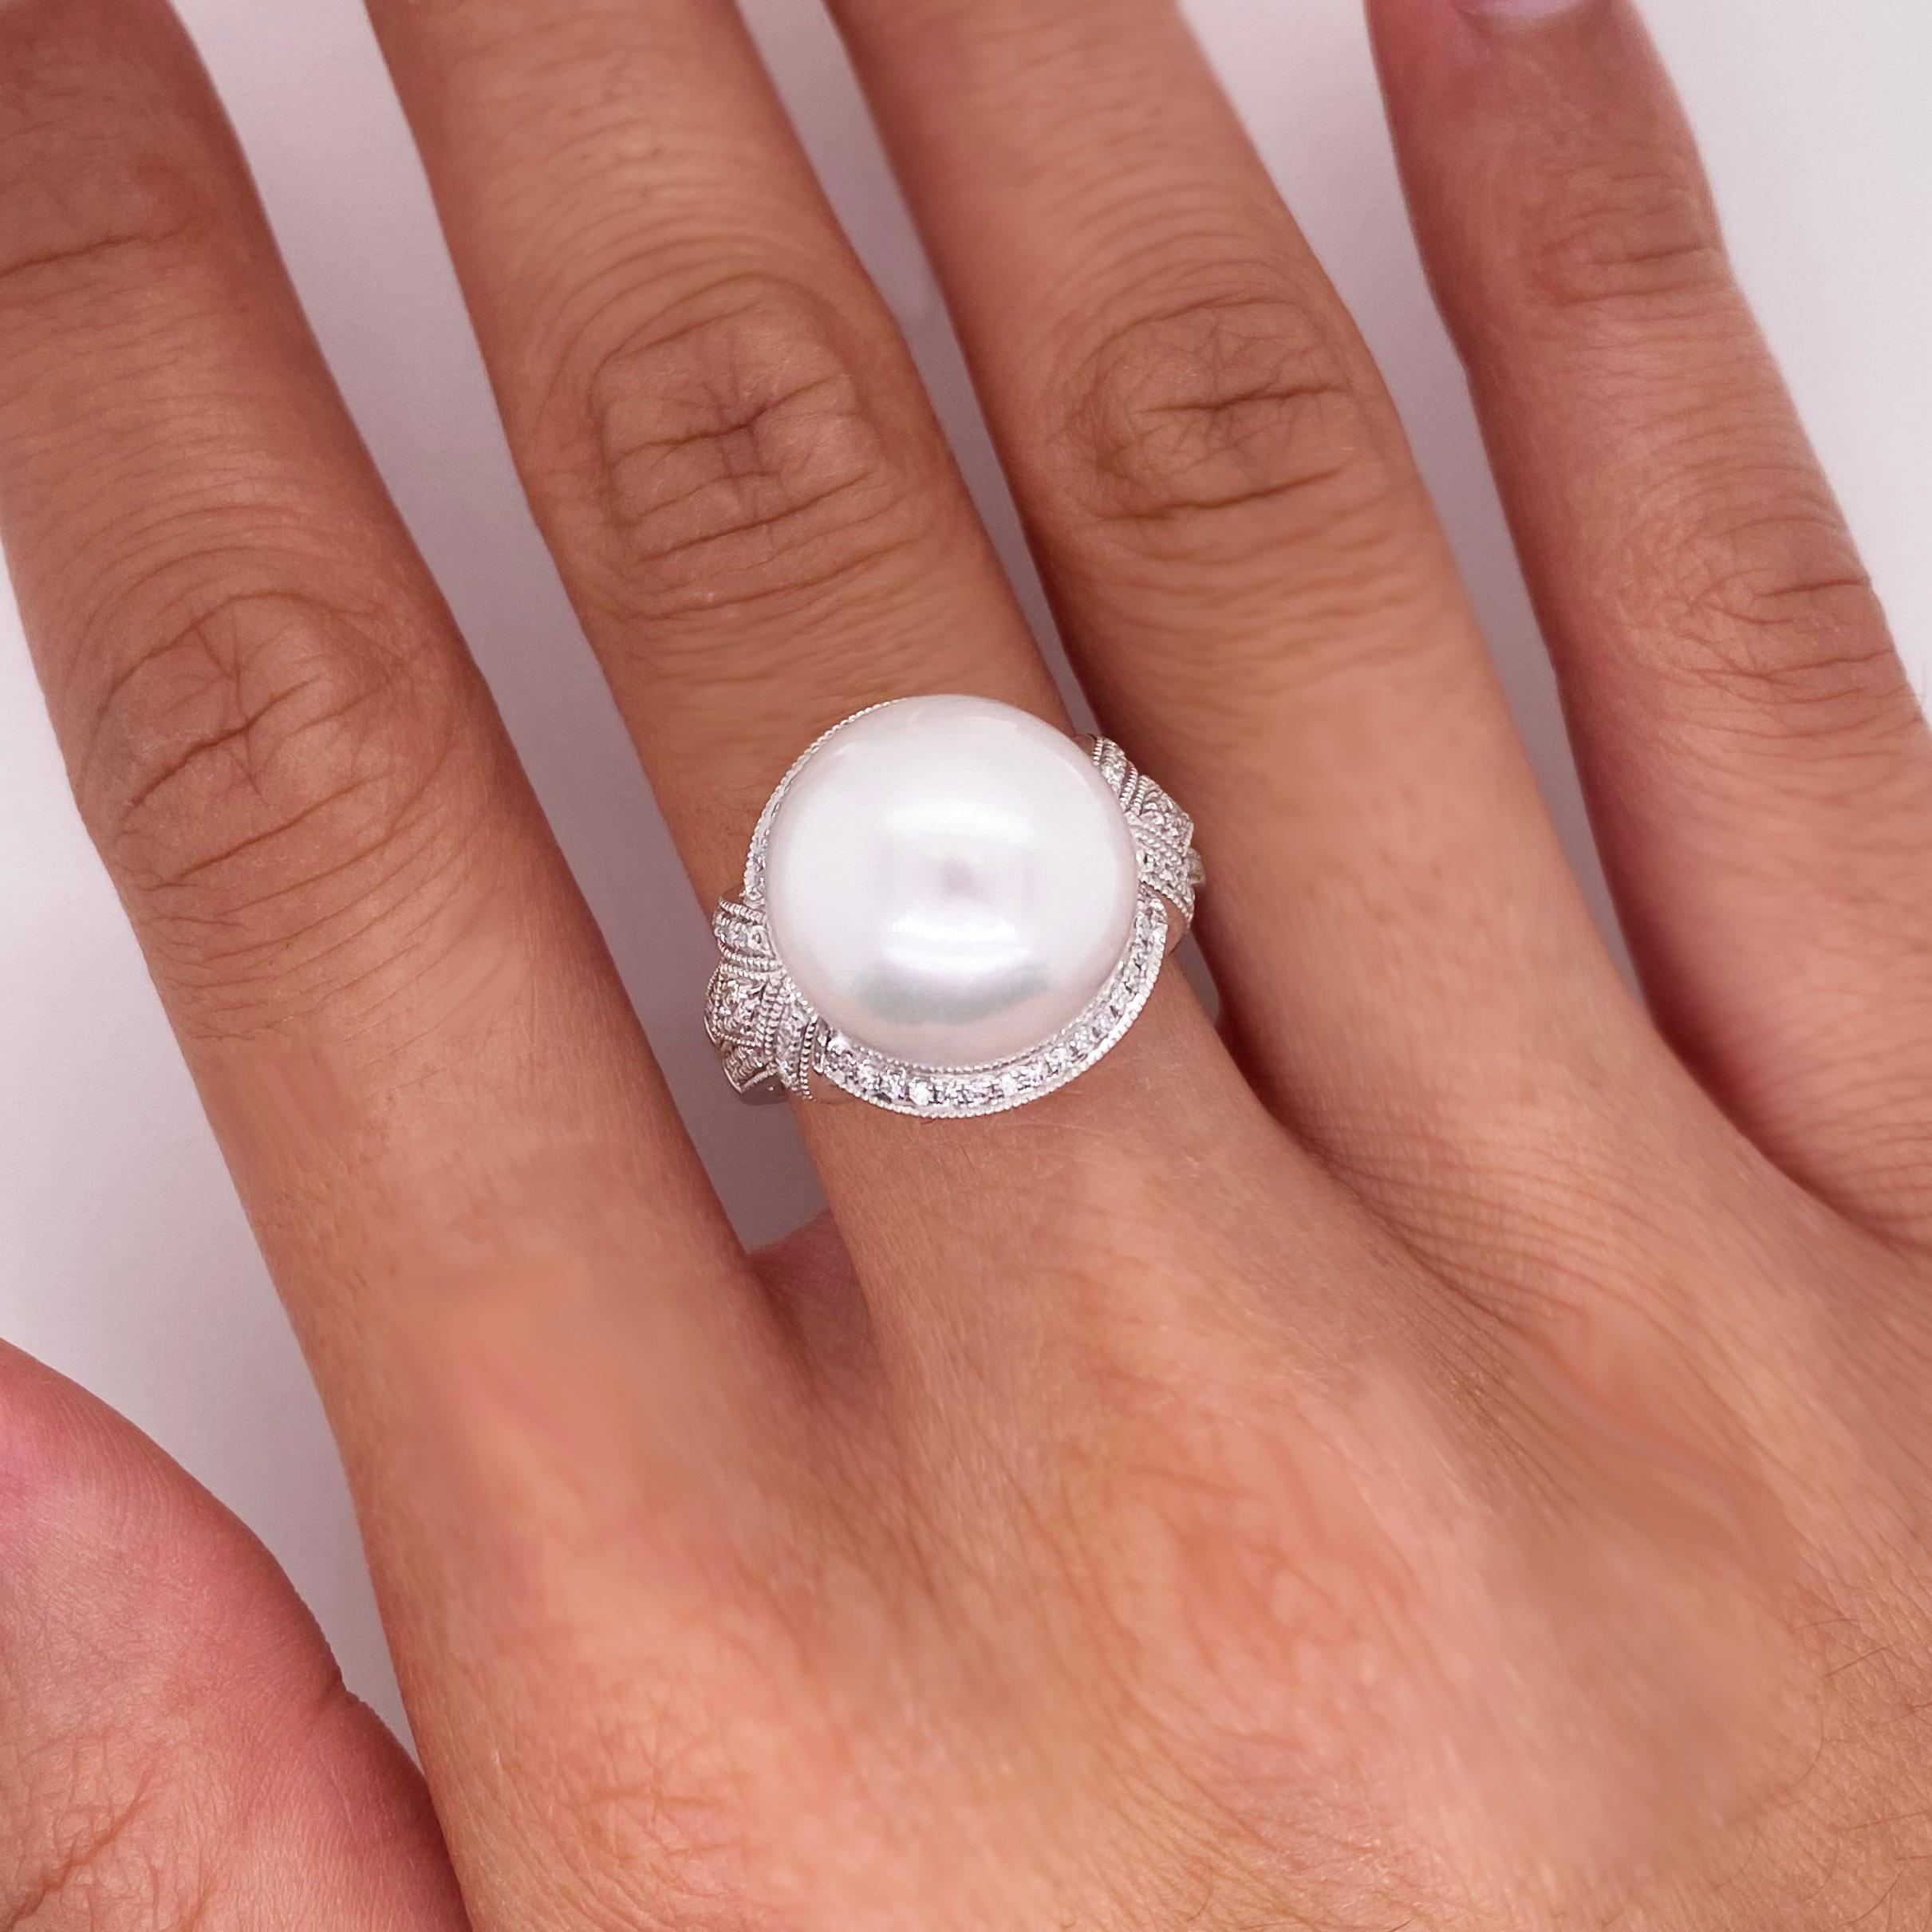 For Sale:  South Sea Pearl w Diamond Statement Ring, White Gold, Pearl Cultured 4